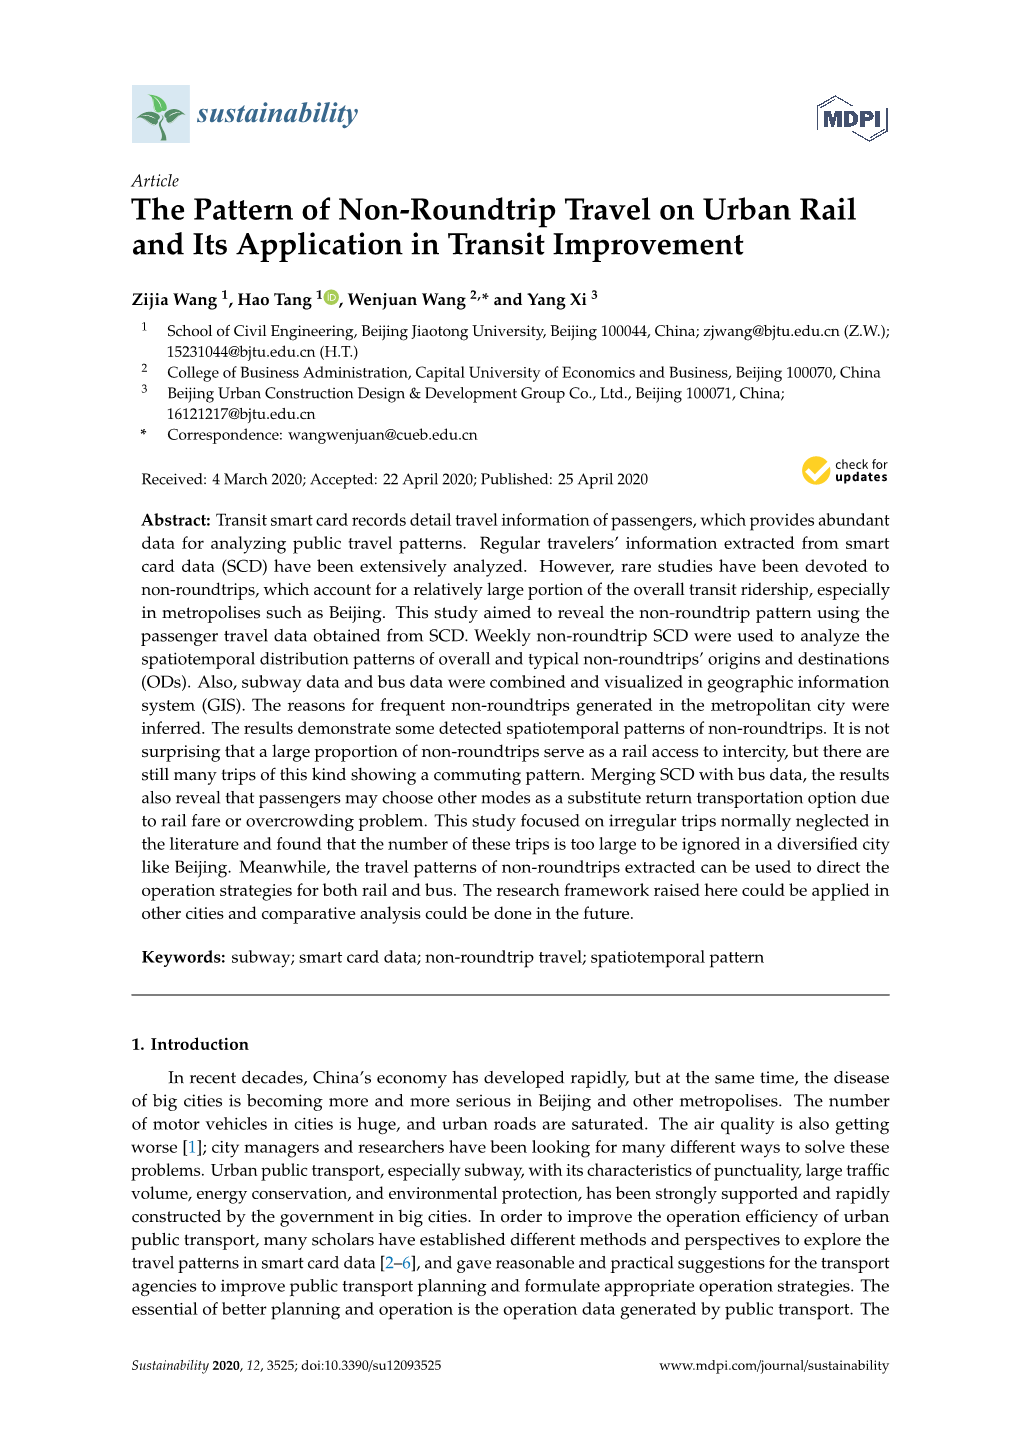 The Pattern of Non-Roundtrip Travel on Urban Rail and Its Application in Transit Improvement